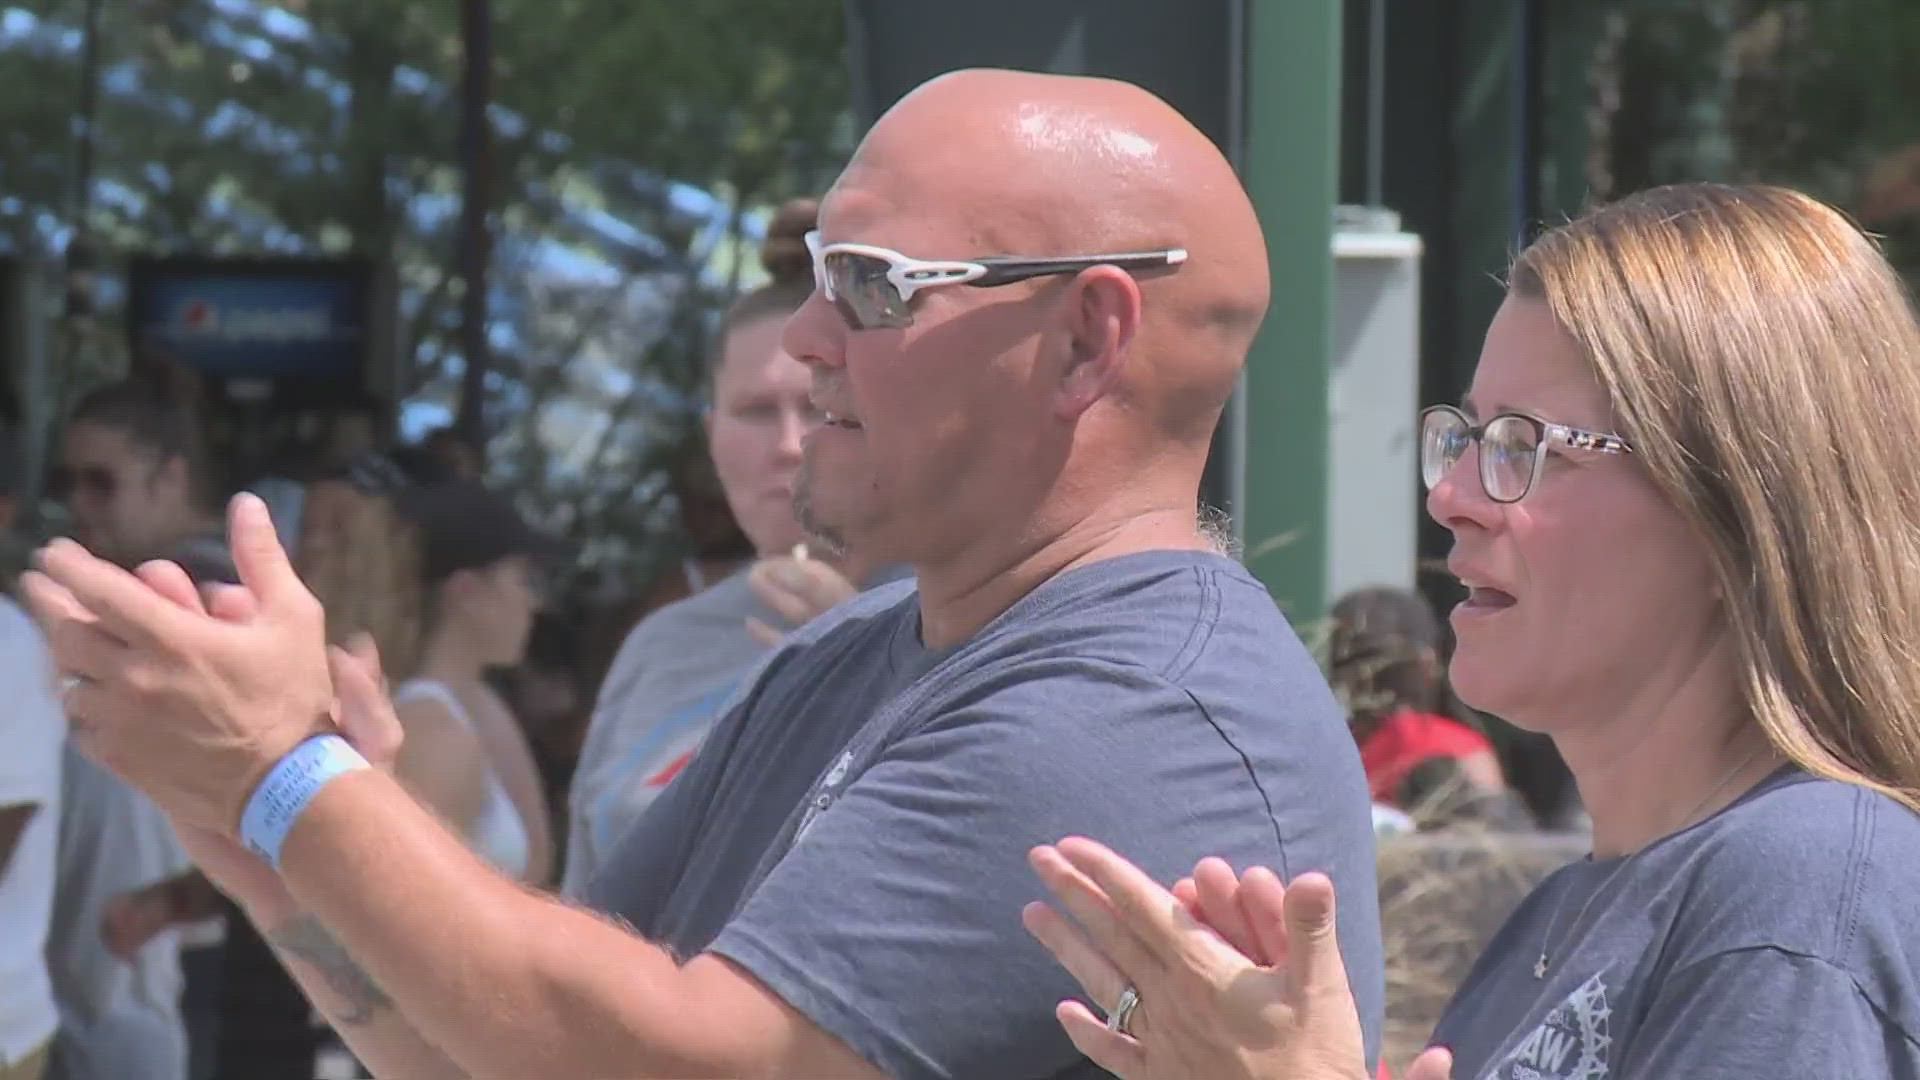 More than 4,000 union members from across the Louisville area gathered at their annual Labor Day picnic.